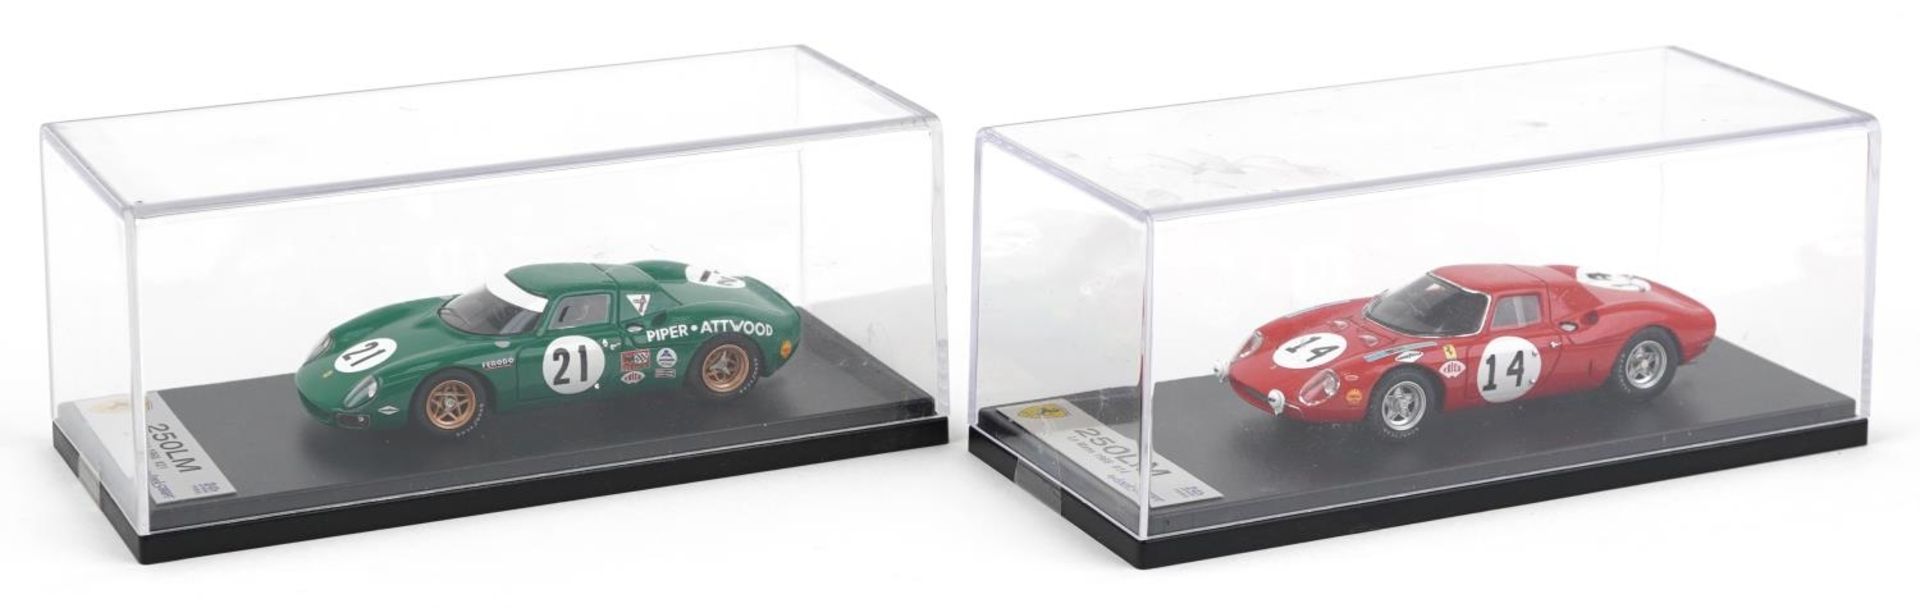 Two Looksmart 1:43 scale diecast model racing vehicles with boxes and display cases comprising Le - Bild 2 aus 3